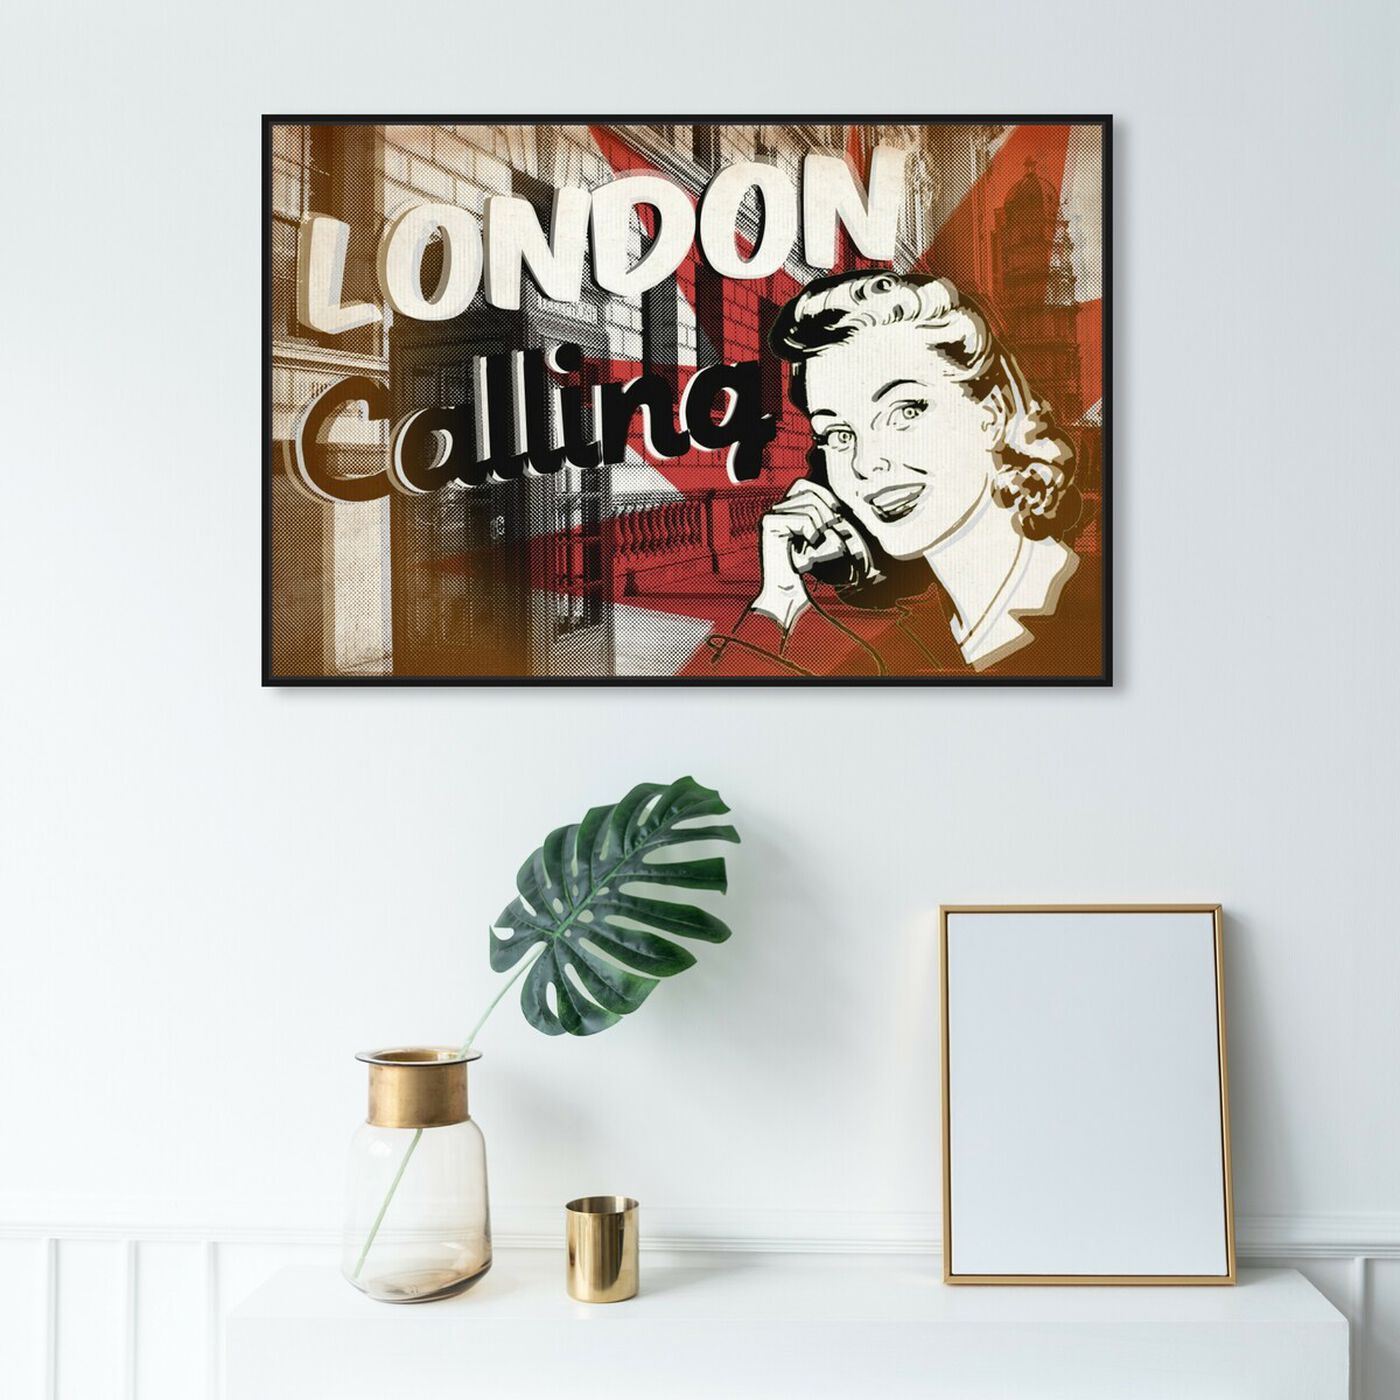 Hanging view of London Calling featuring advertising and posters art.